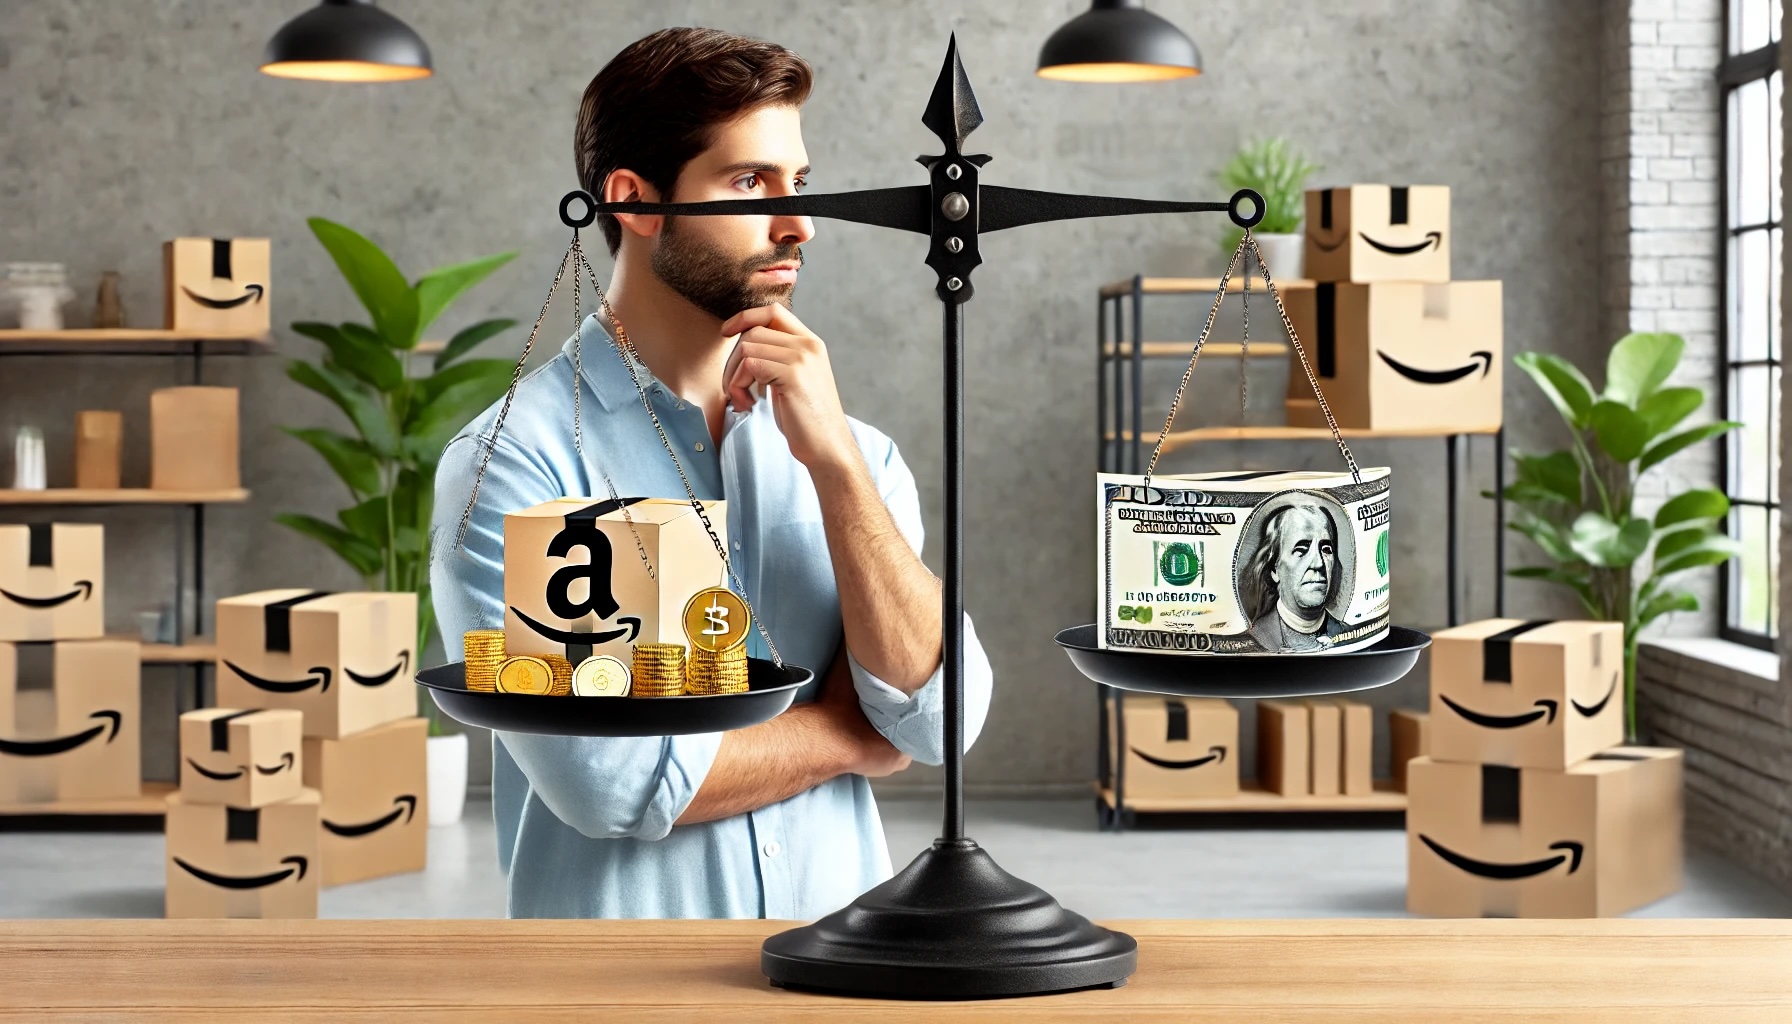 An Amazon seller that's looking at a scale that is weighing the value of ppc ads